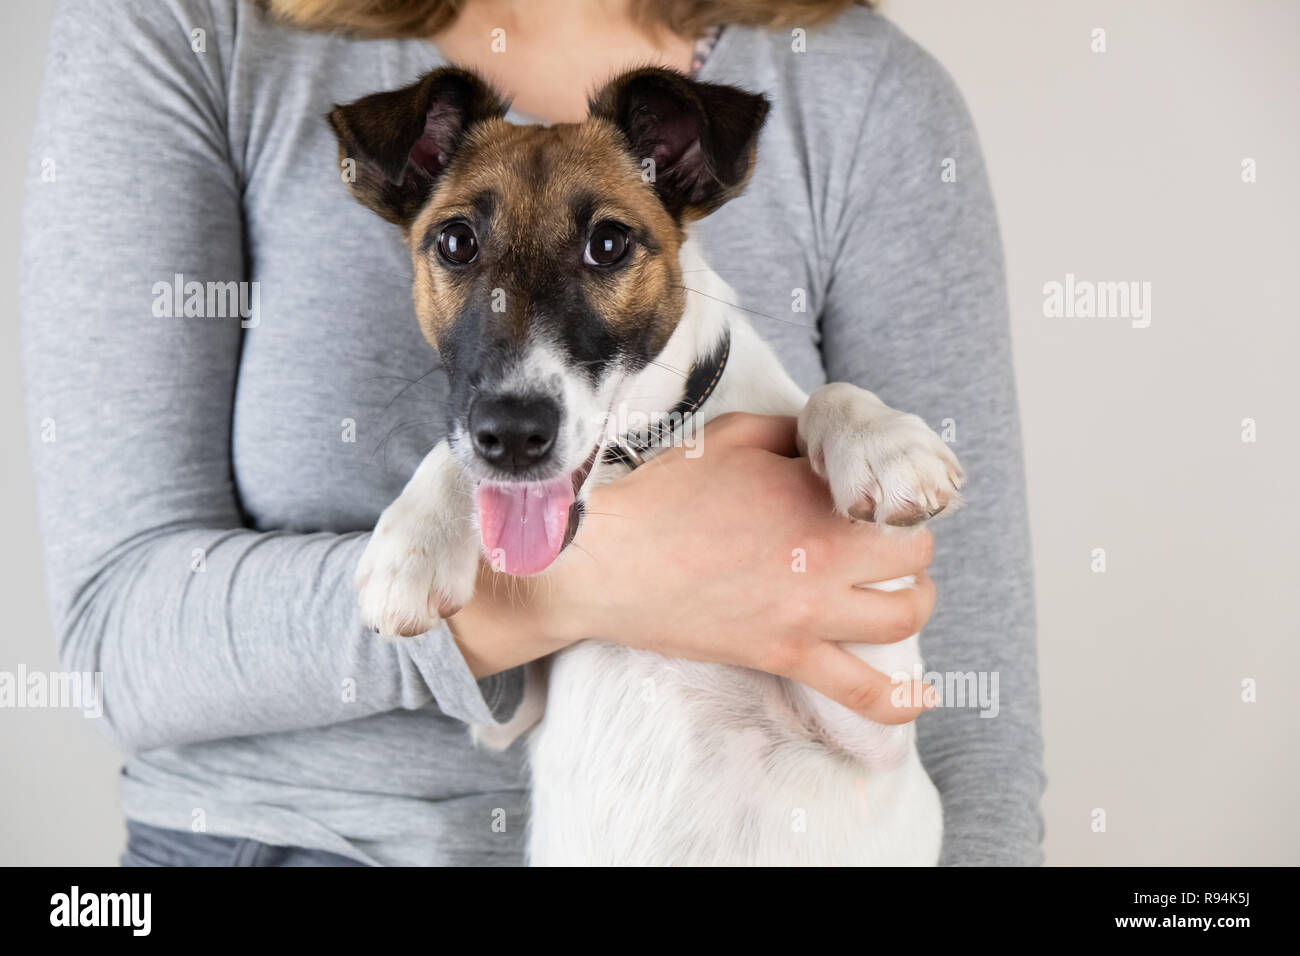 Cute little fox terrier puppy in female hands. Portrait of purebred dog held by a woman in studio background Stock Photo